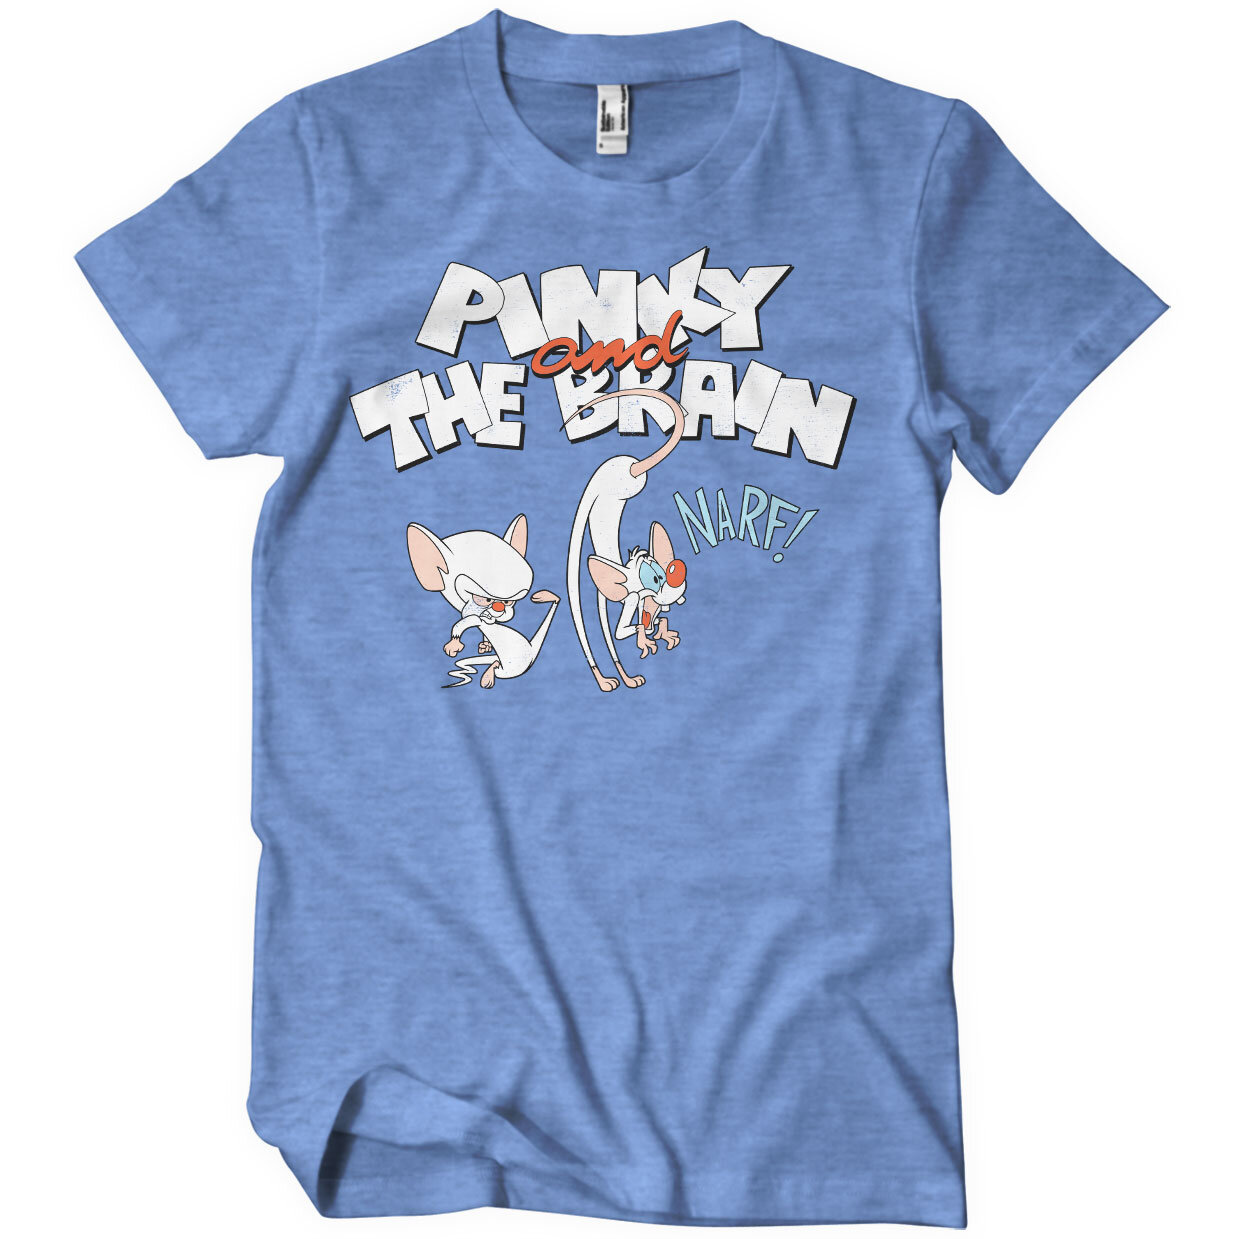 Pinky and The Brain - NARF T-Shirt